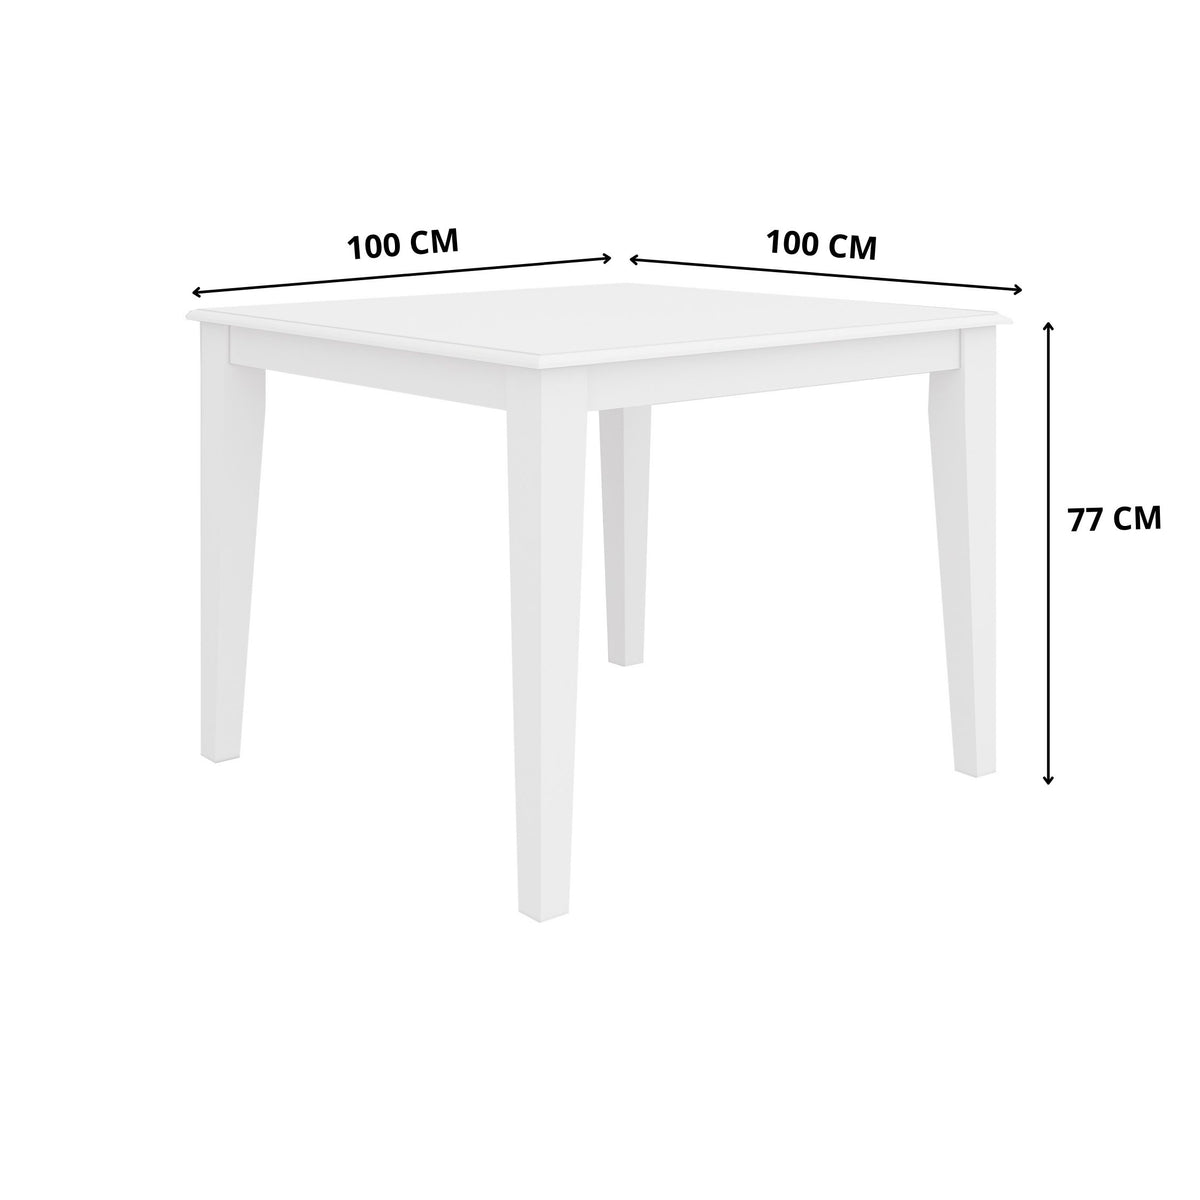 Daisy Dining Table 100cm Solid Acacia Timber Wood Hampton Furniture - White